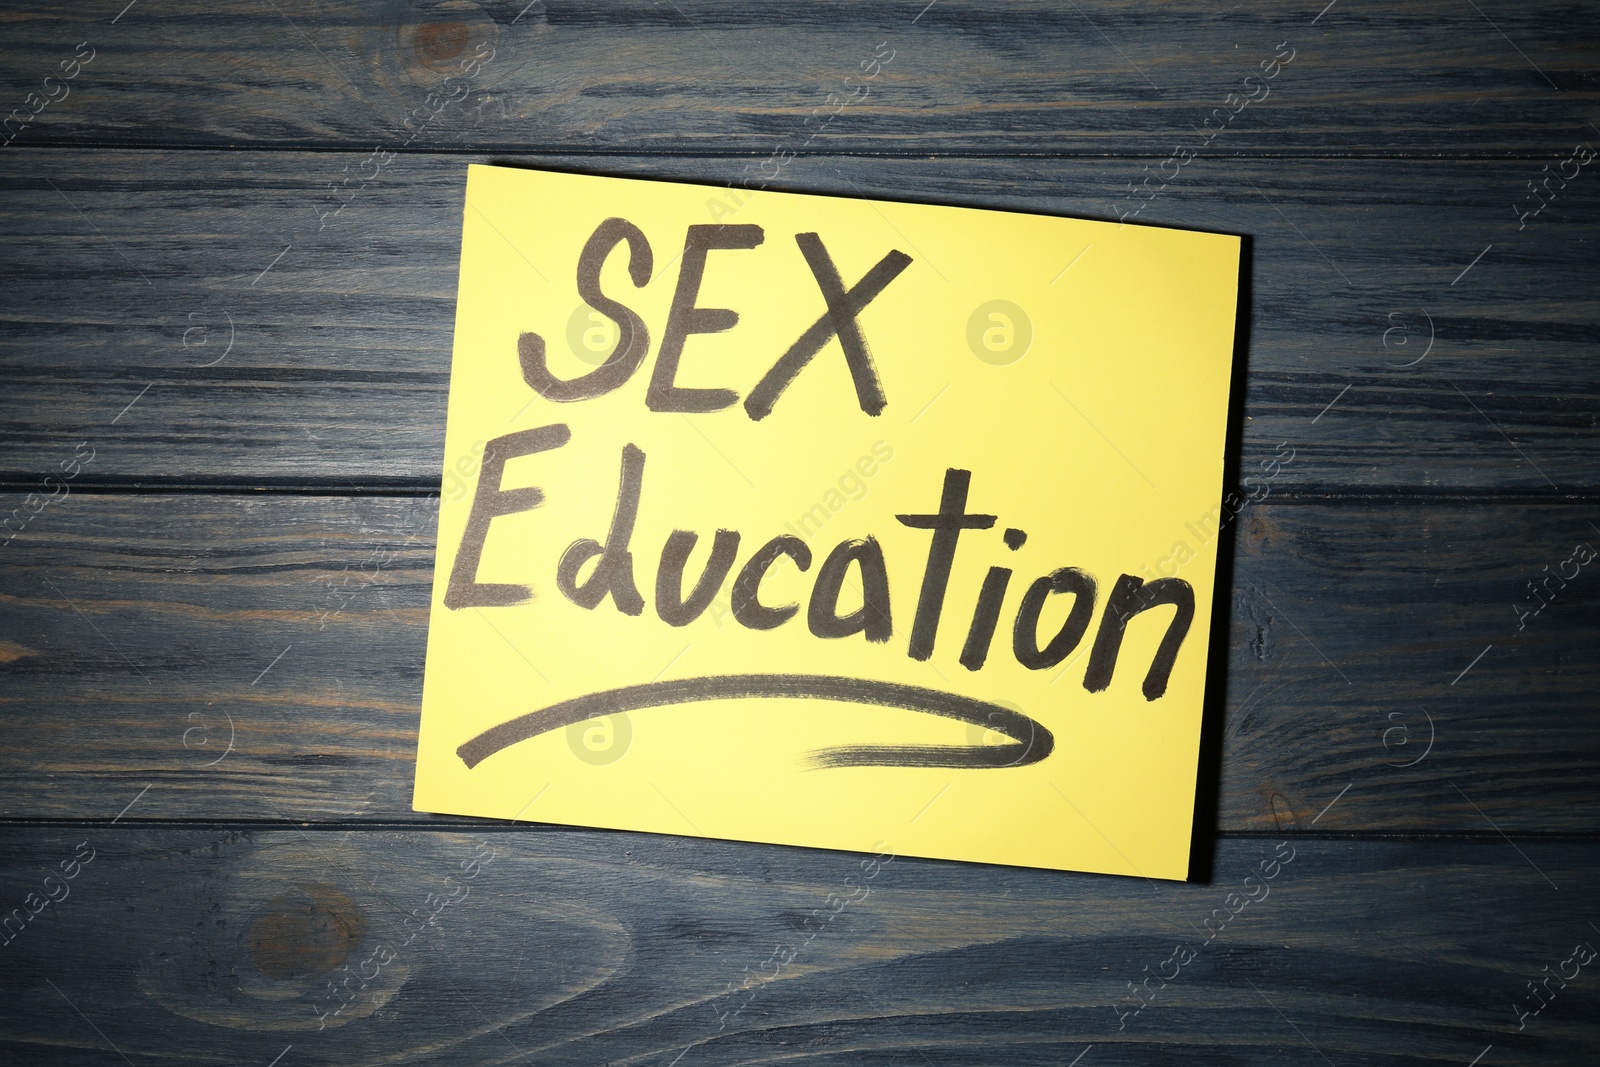 Photo of Note with phrase "SEX EDUCATION" on dark wooden background, top view